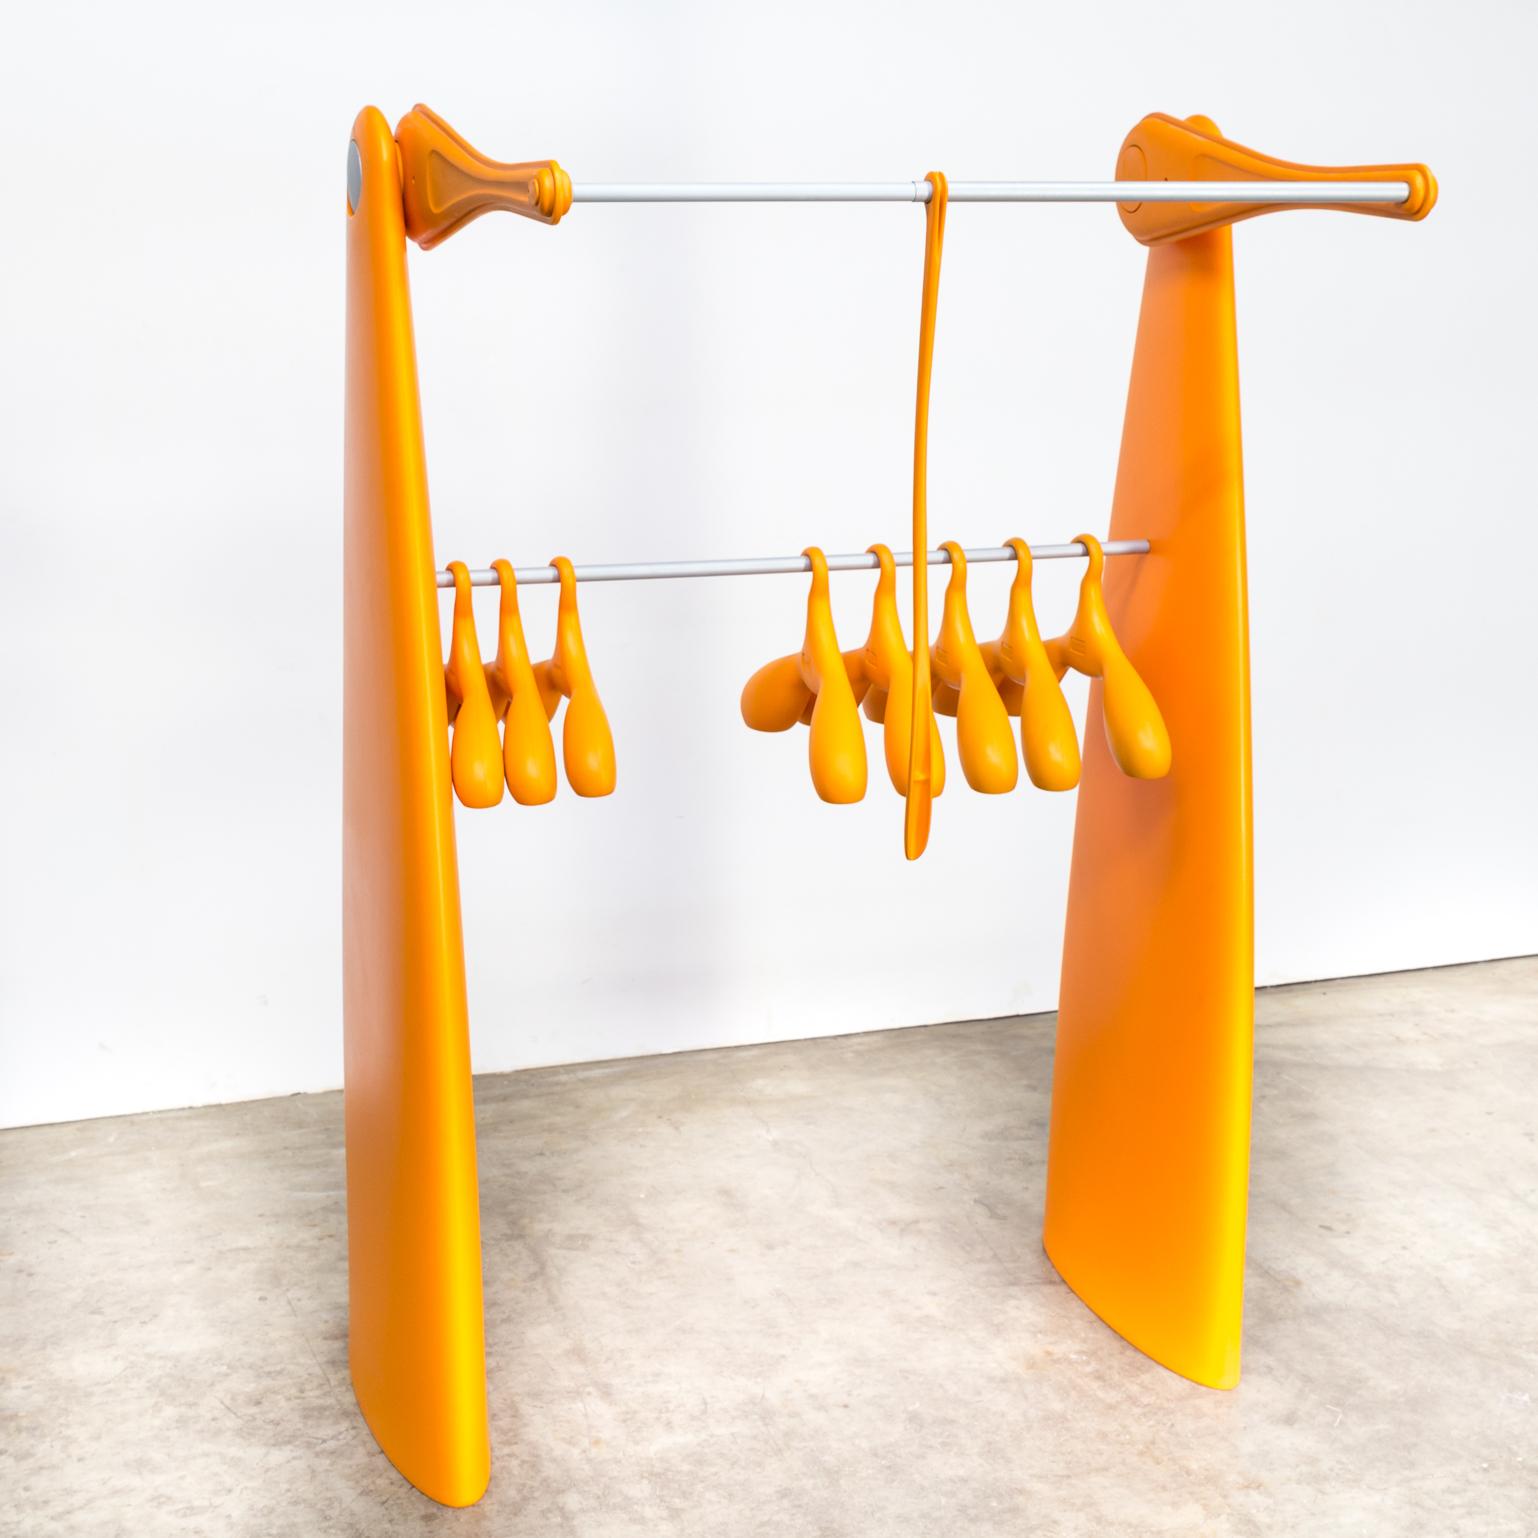 E. Terragni Coat Stand ‘Atelier’ & Servetto Lift and Dino Clothes Hangers im Angebot 2